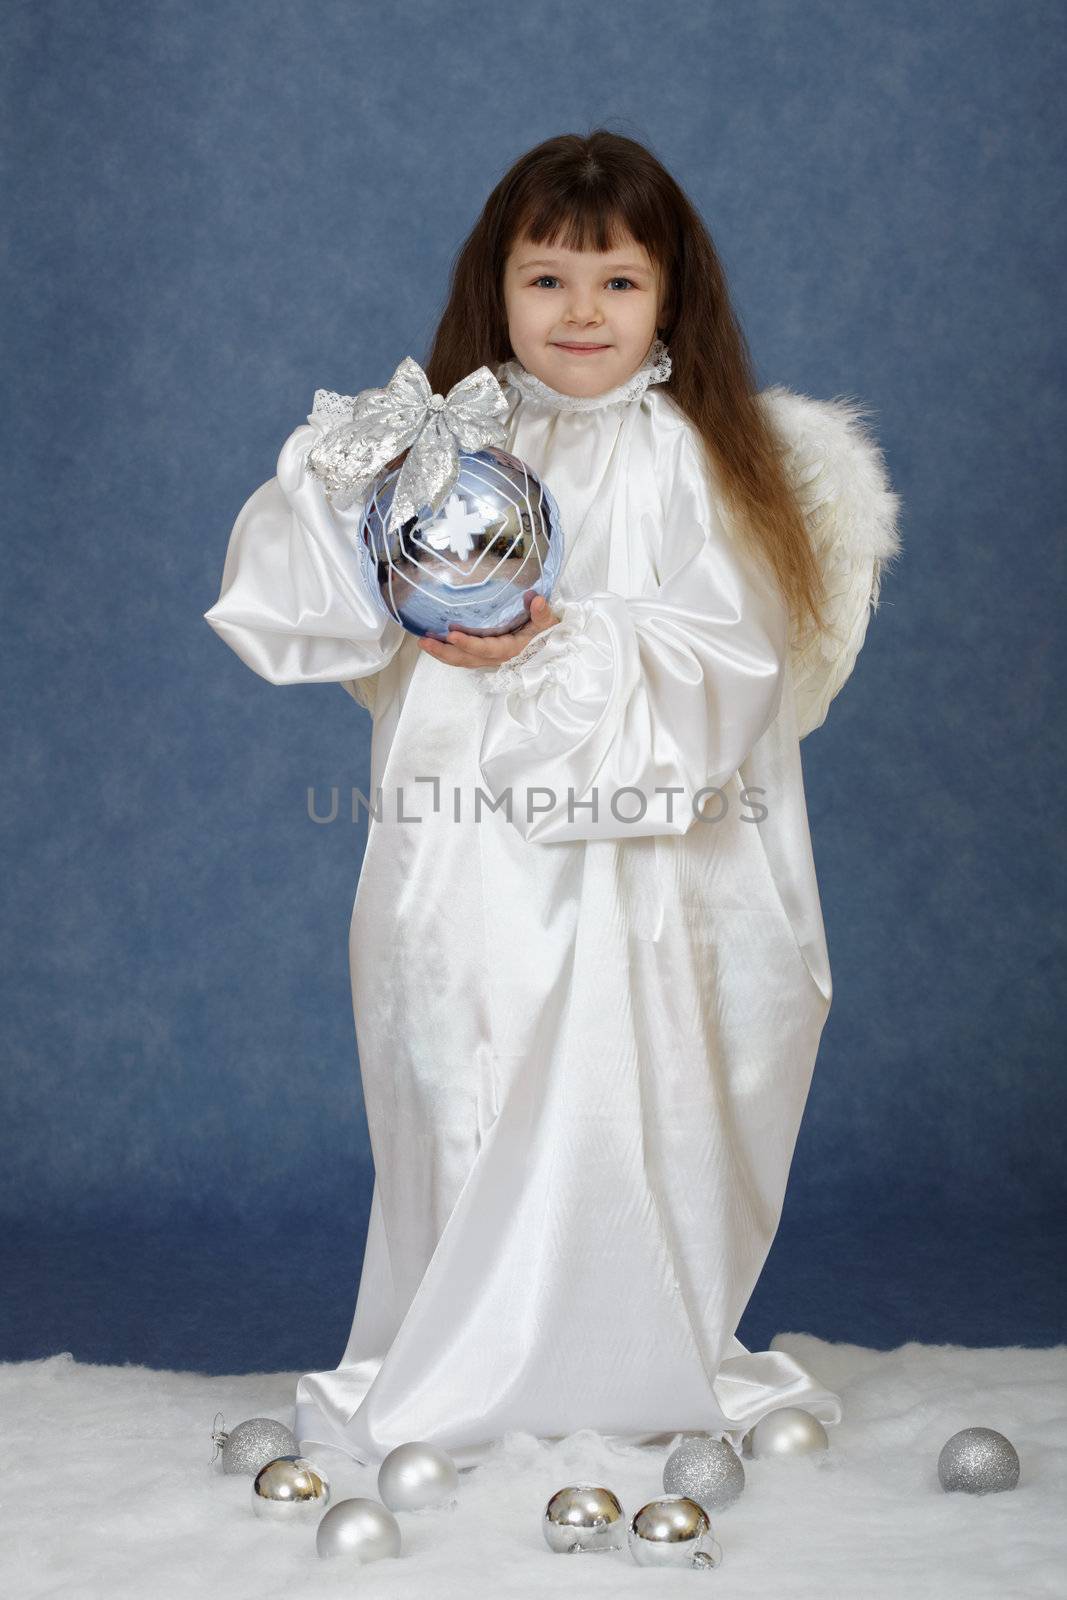 Girl holding a New Year's ball on a blue background